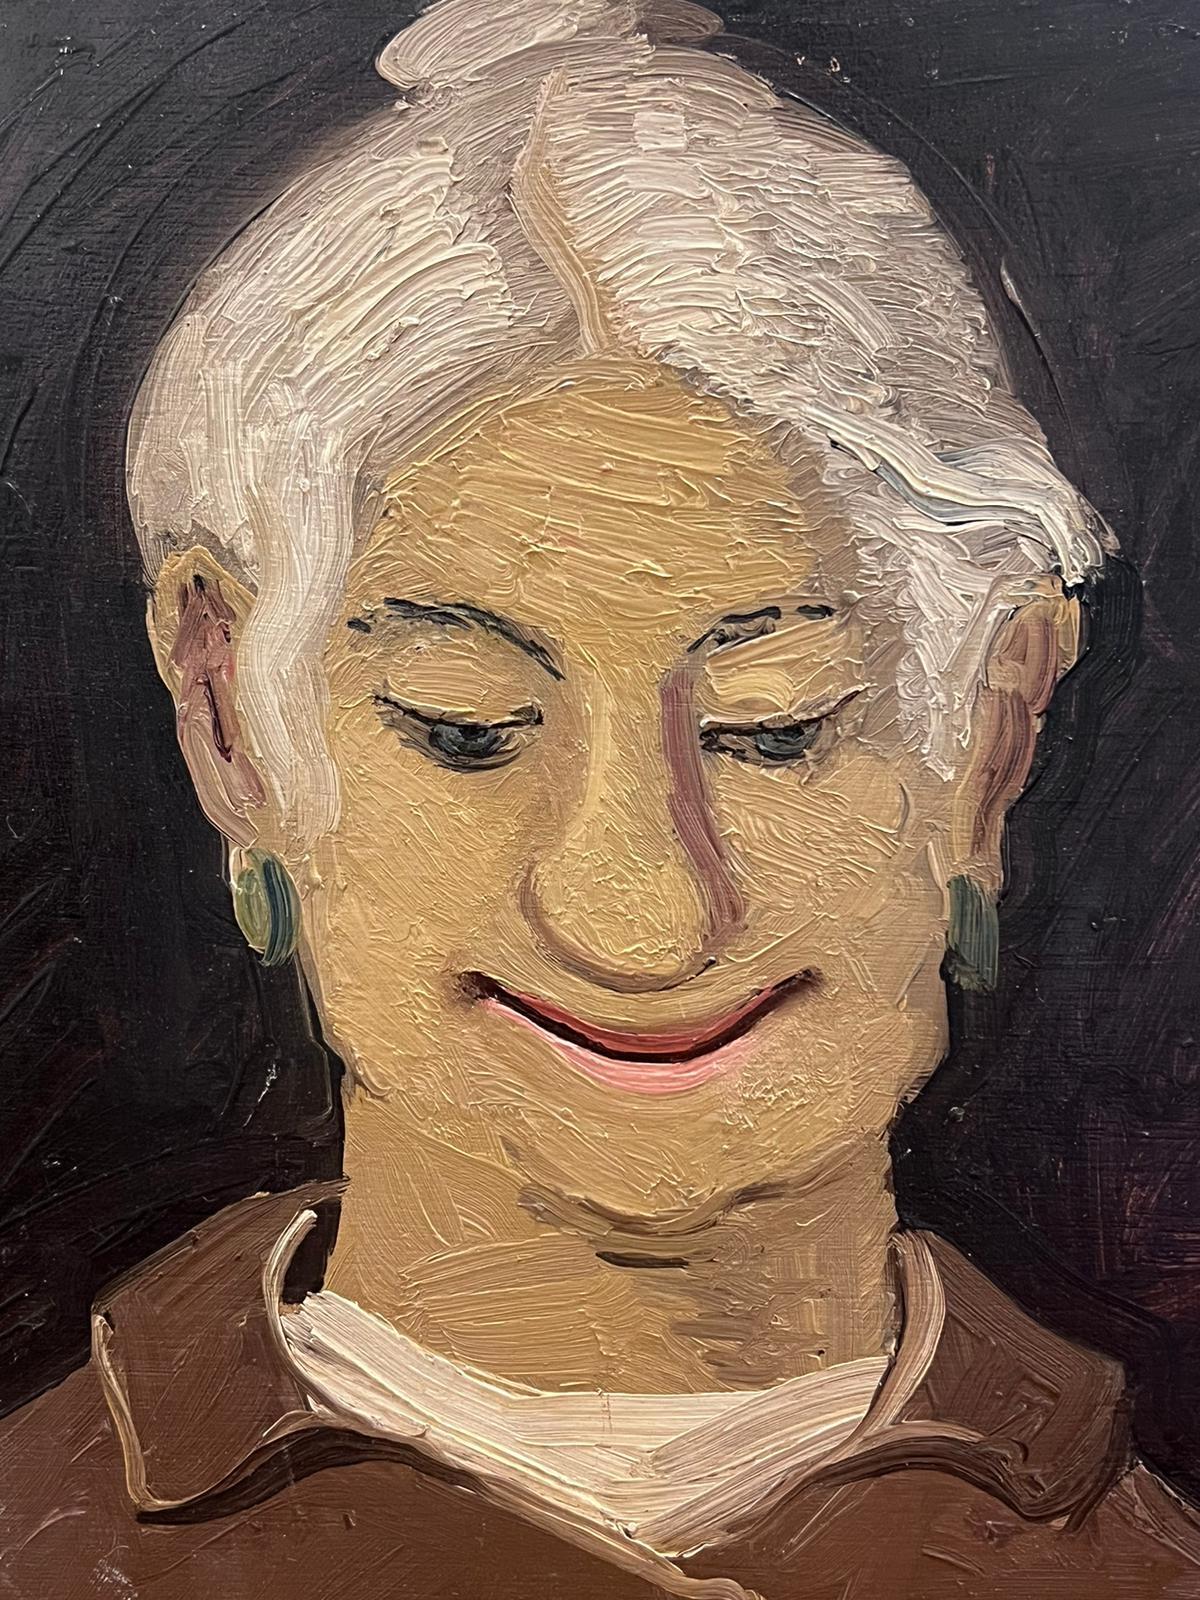 Lady Smiling
French Modernist School, circa 1960's period
oil on board unframed
board: 10.5 x 8.75 inches
provenance: private collection, France
condition: very good and sound condition